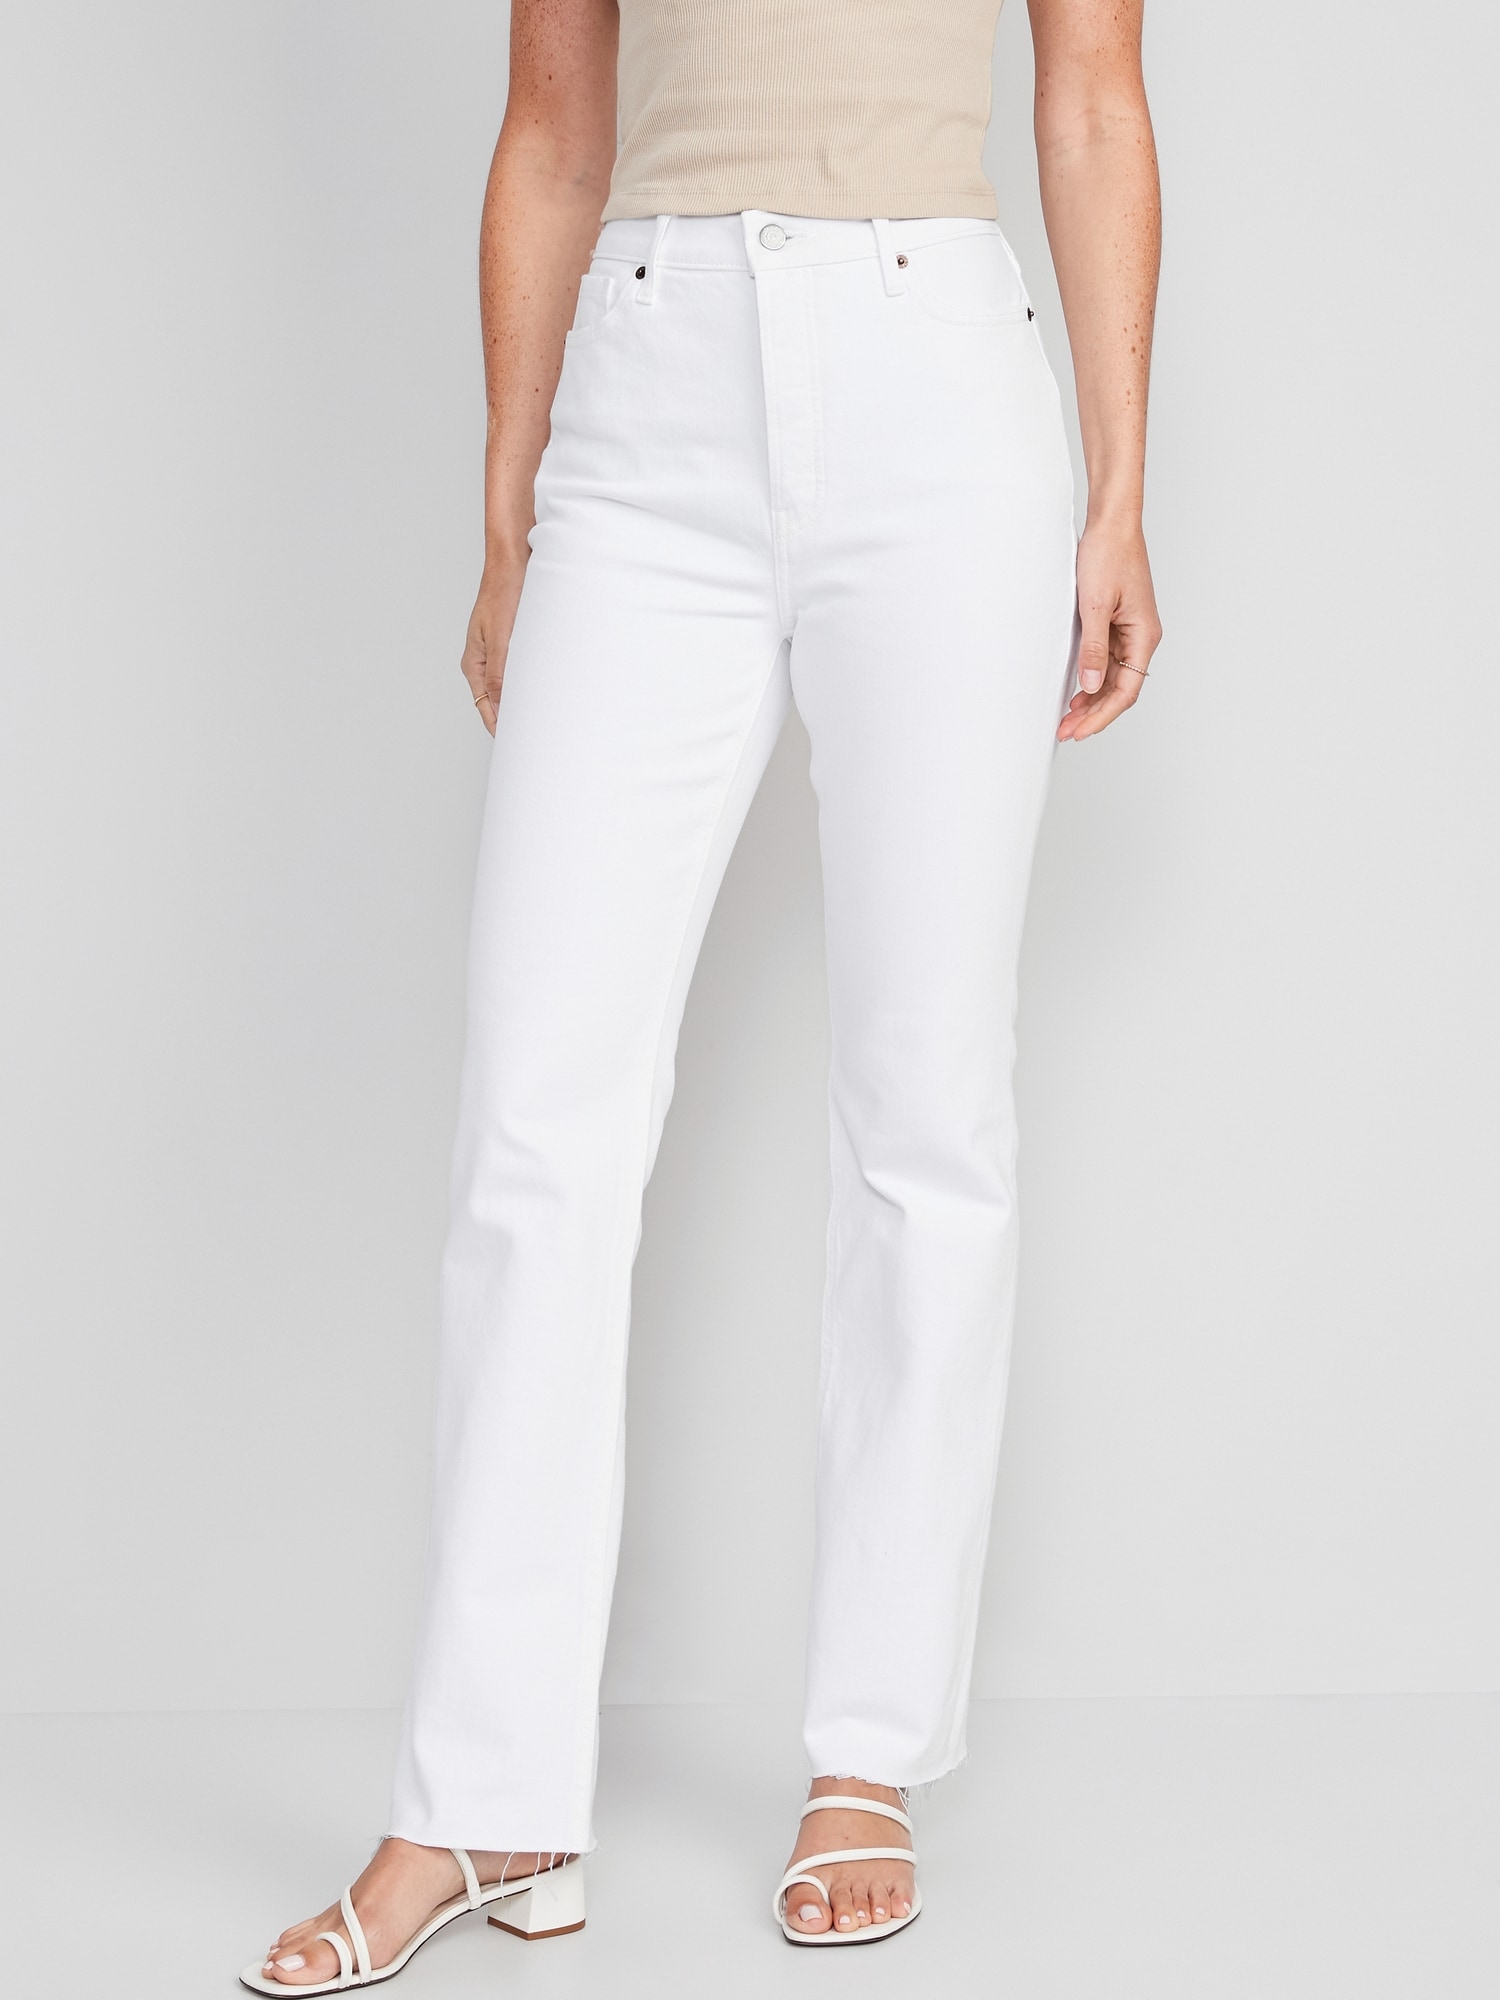 Old Navy Extra High-Waisted Button-Fly White-Wash Cut-Off Kicker Boot-Cut Jeans for Women white. 1